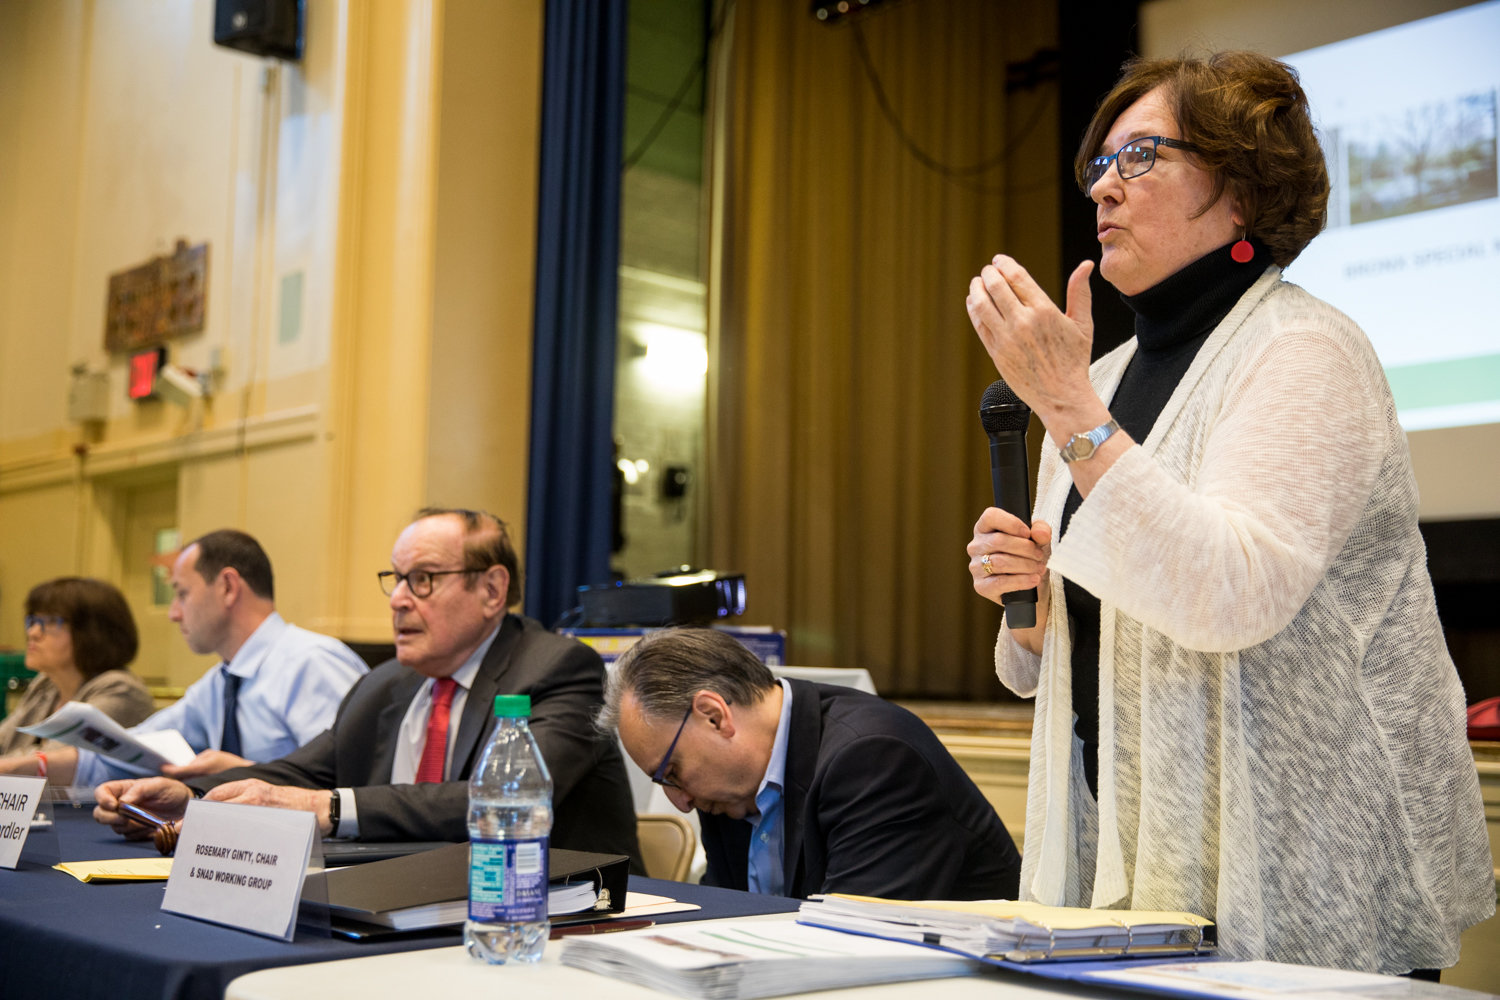 Community Board 8 chair Rosemary Ginty speaks at a land use committee meeting about the proposed changes to Special Natural Area District regulations at P.S. 81 last year. The race to fill Ginty’s seat is heating up ahead of the election this summer.